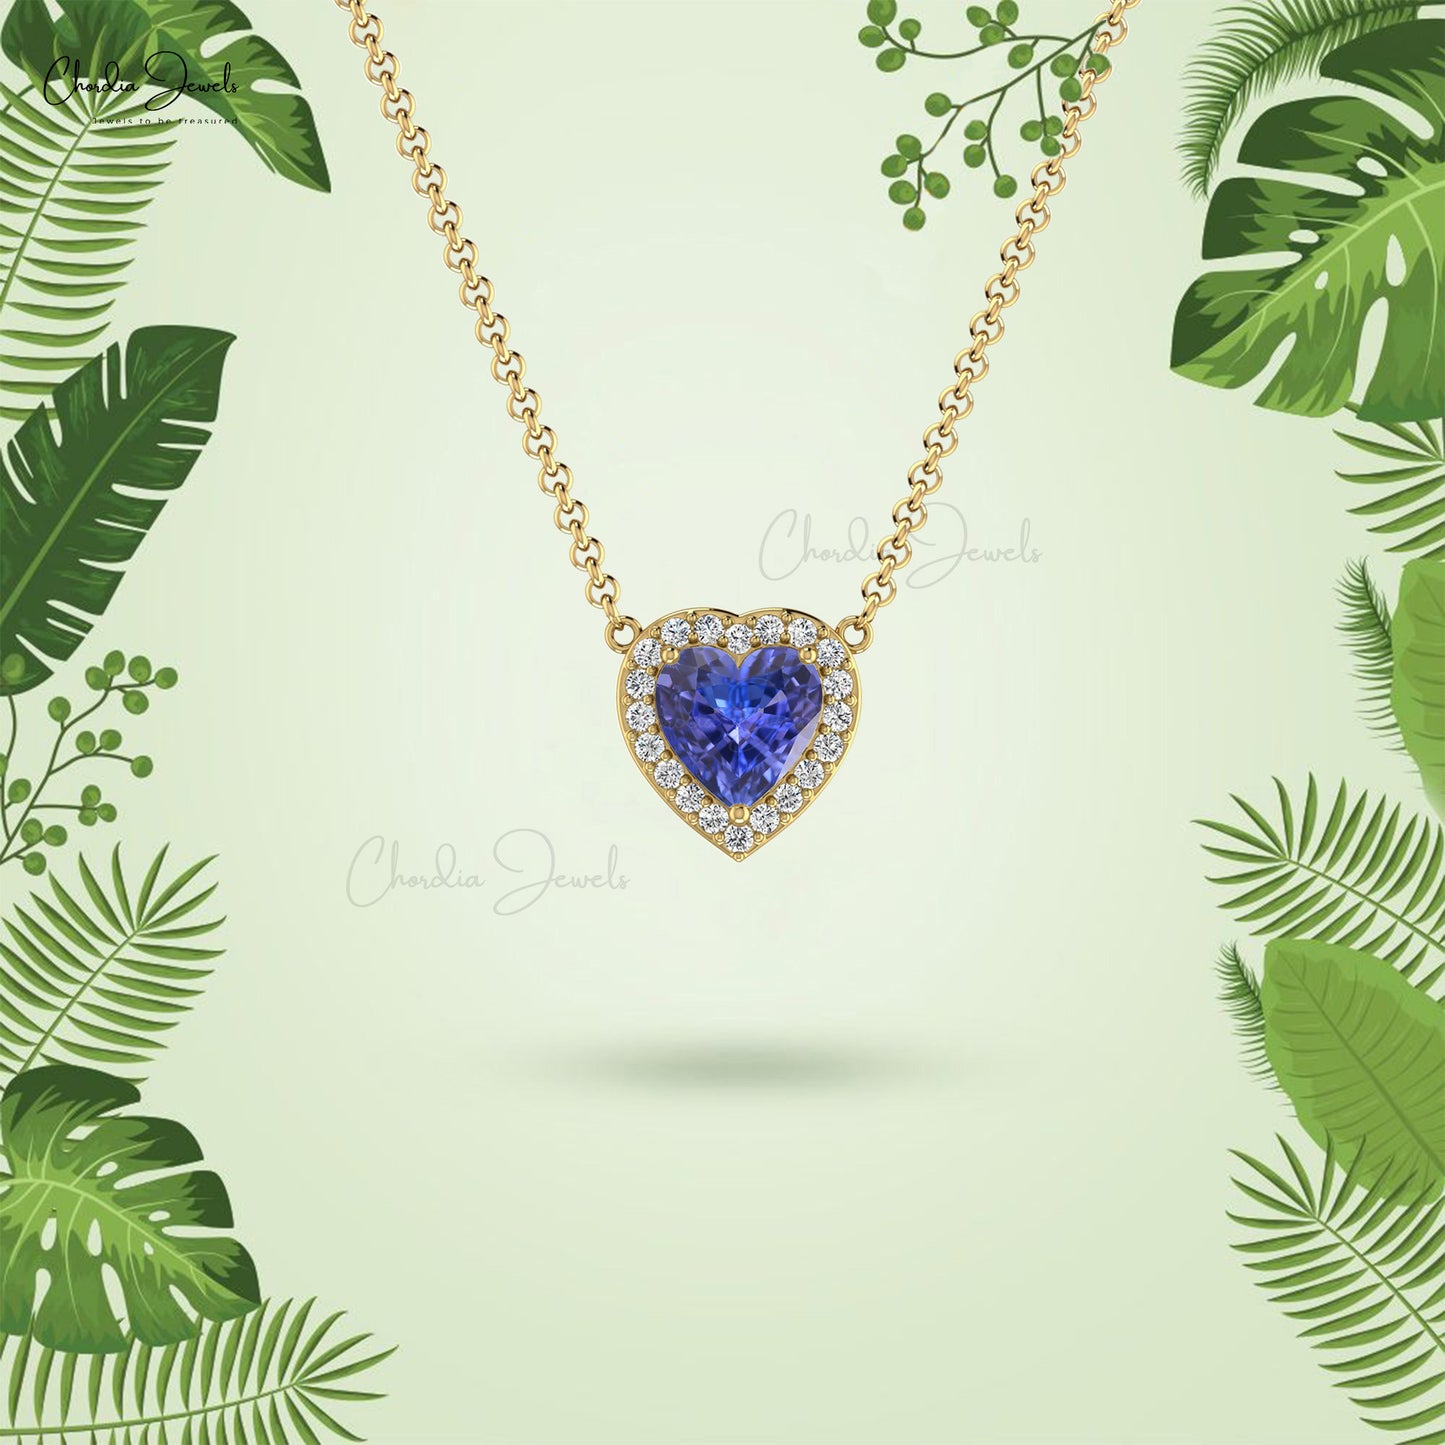 Load image into Gallery viewer, Heart Shape Gemstone Halo Necklace With Diamonds
